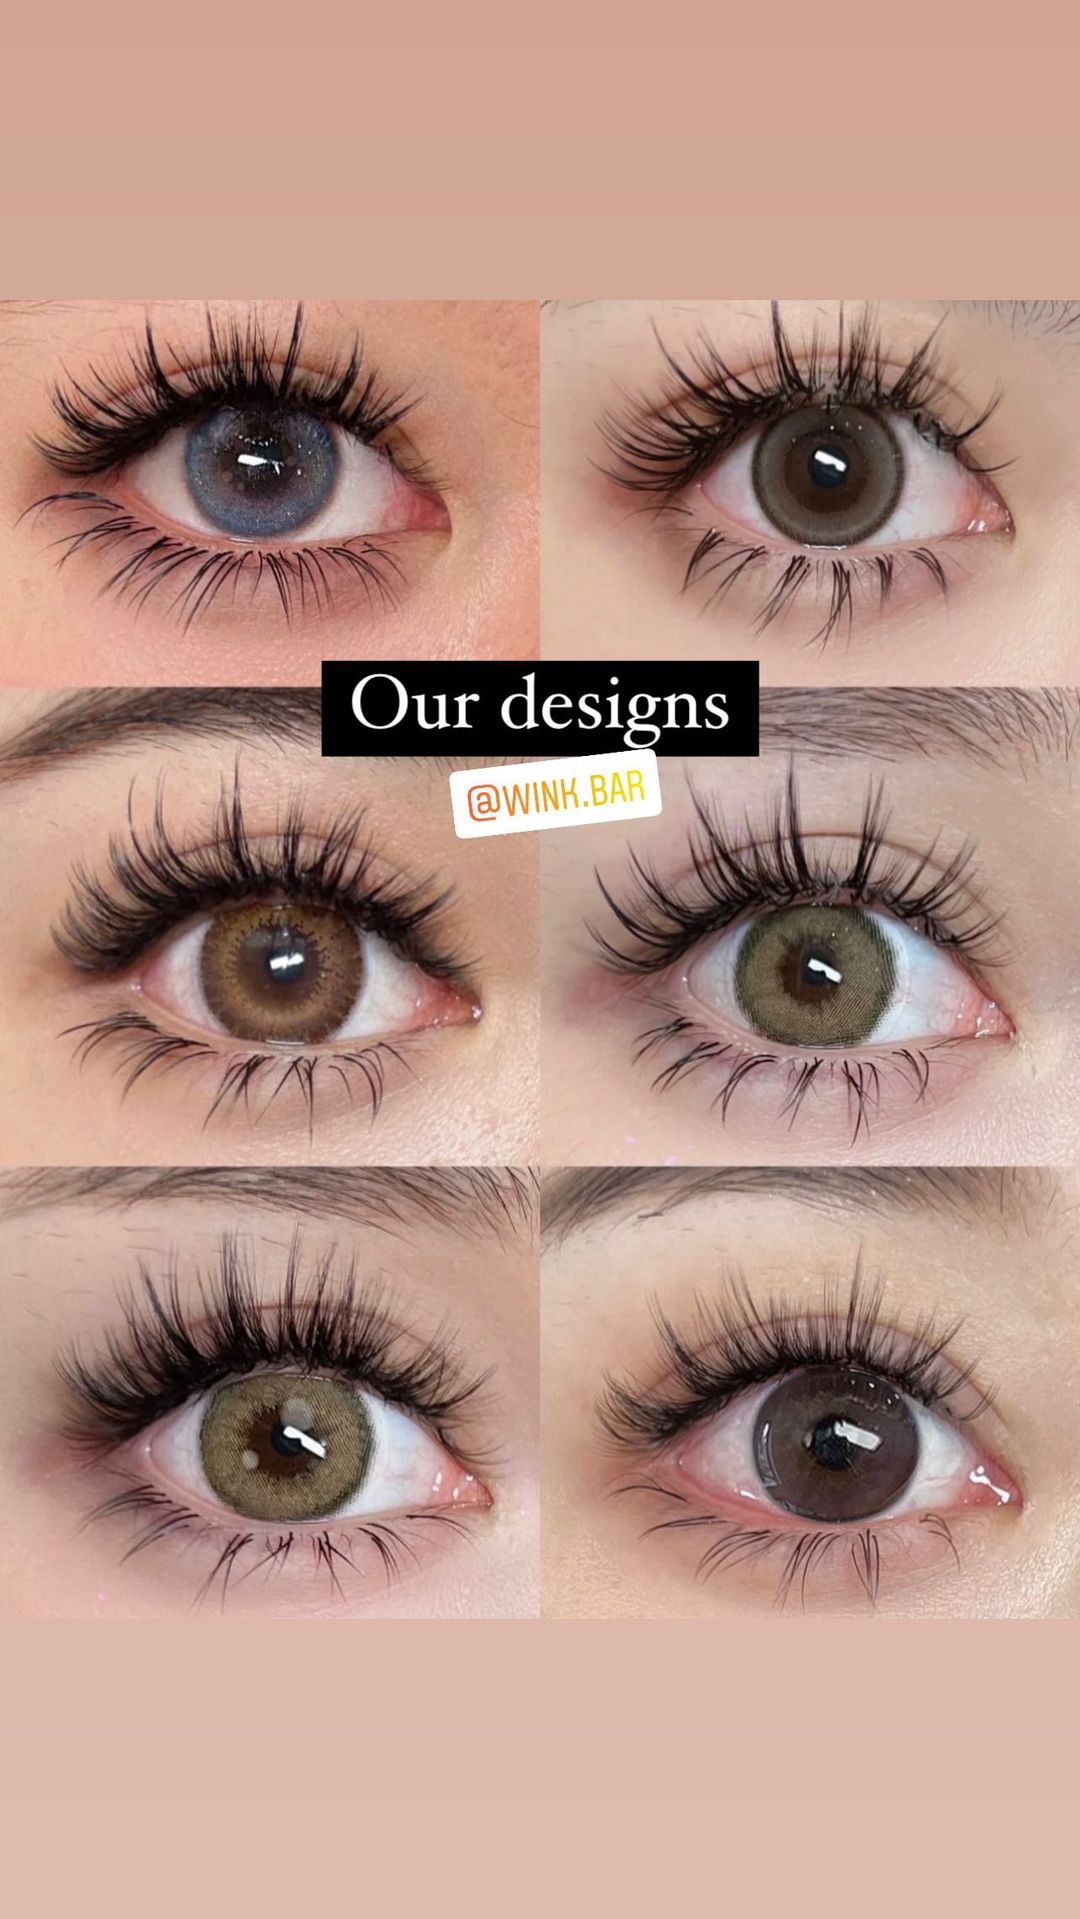 LASHES BY JOLIE 💓 (@lashesby.jolie) • Instagram photos and videos